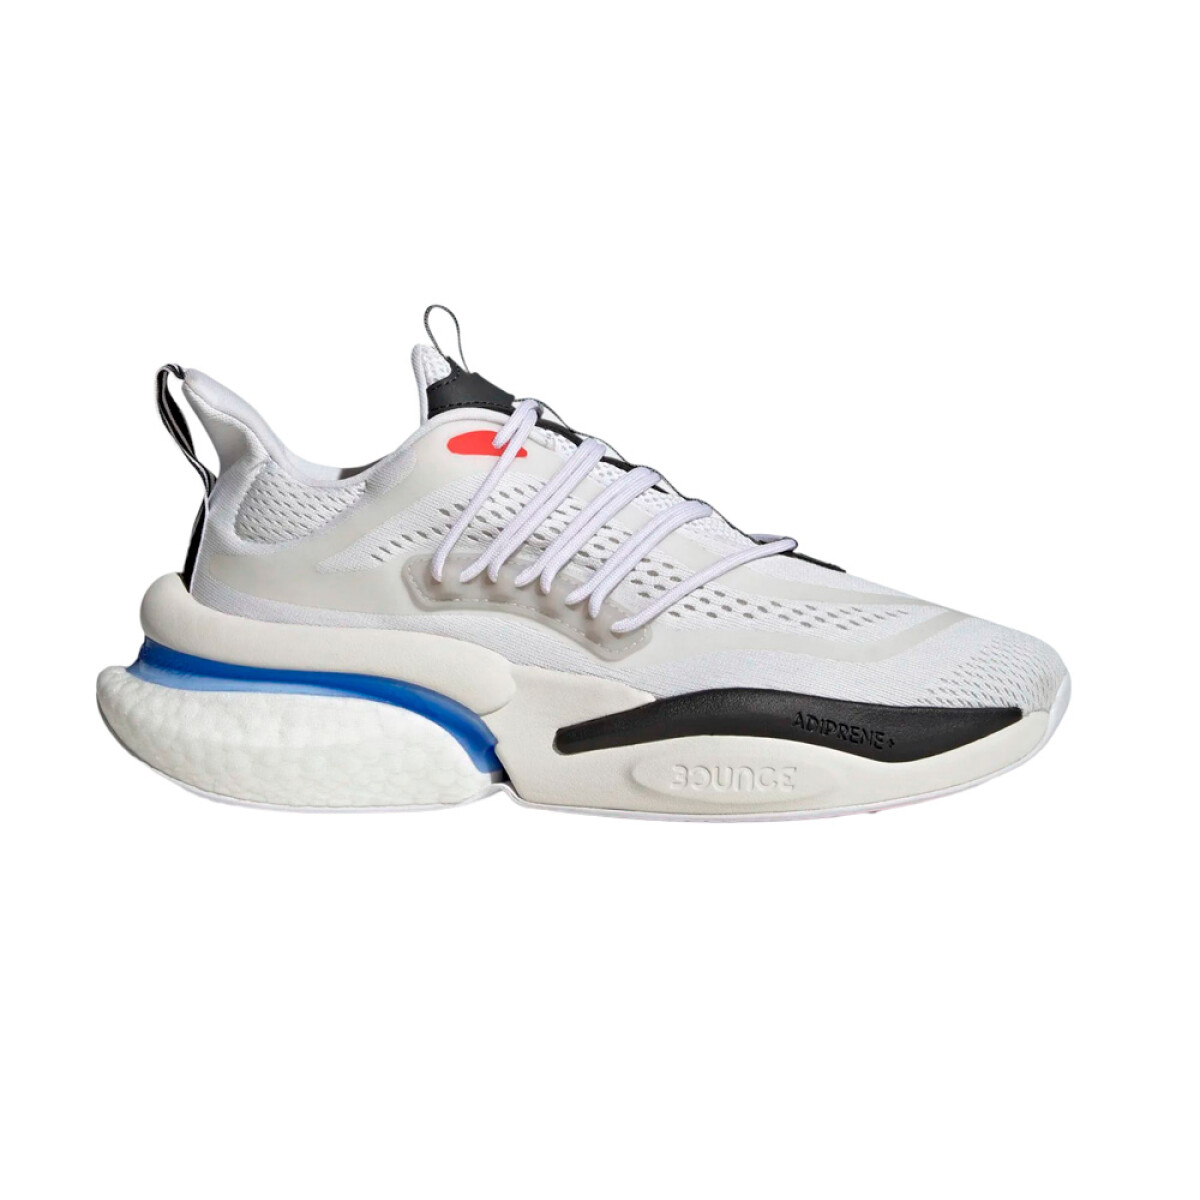 adidas ALPHABOOST V1 SUSTAINABLE BOOST LIFESTYLE - Cloud White / Blue Fusion / Bright Red 